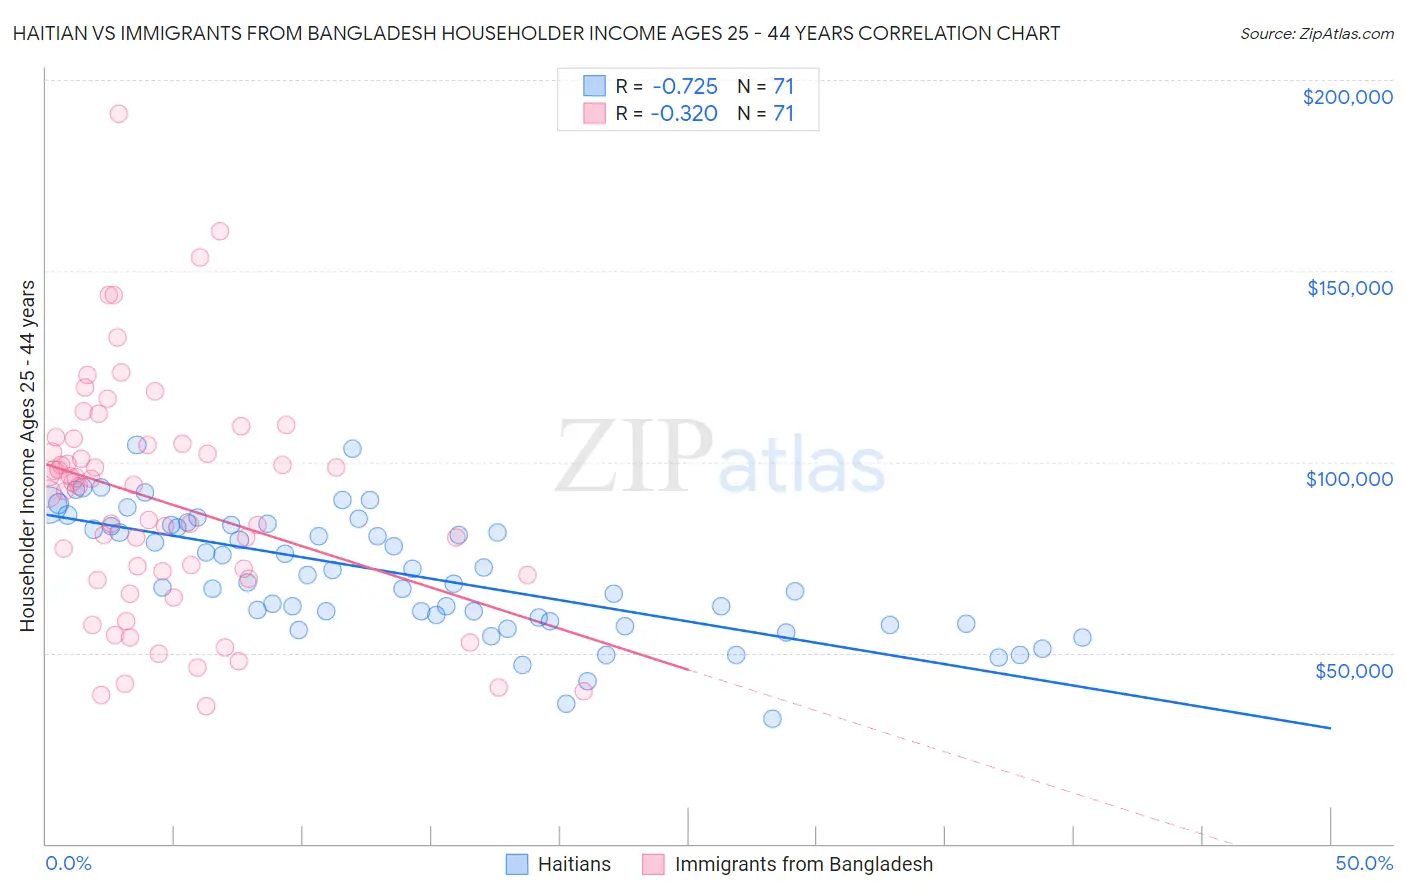 Haitian vs Immigrants from Bangladesh Householder Income Ages 25 - 44 years